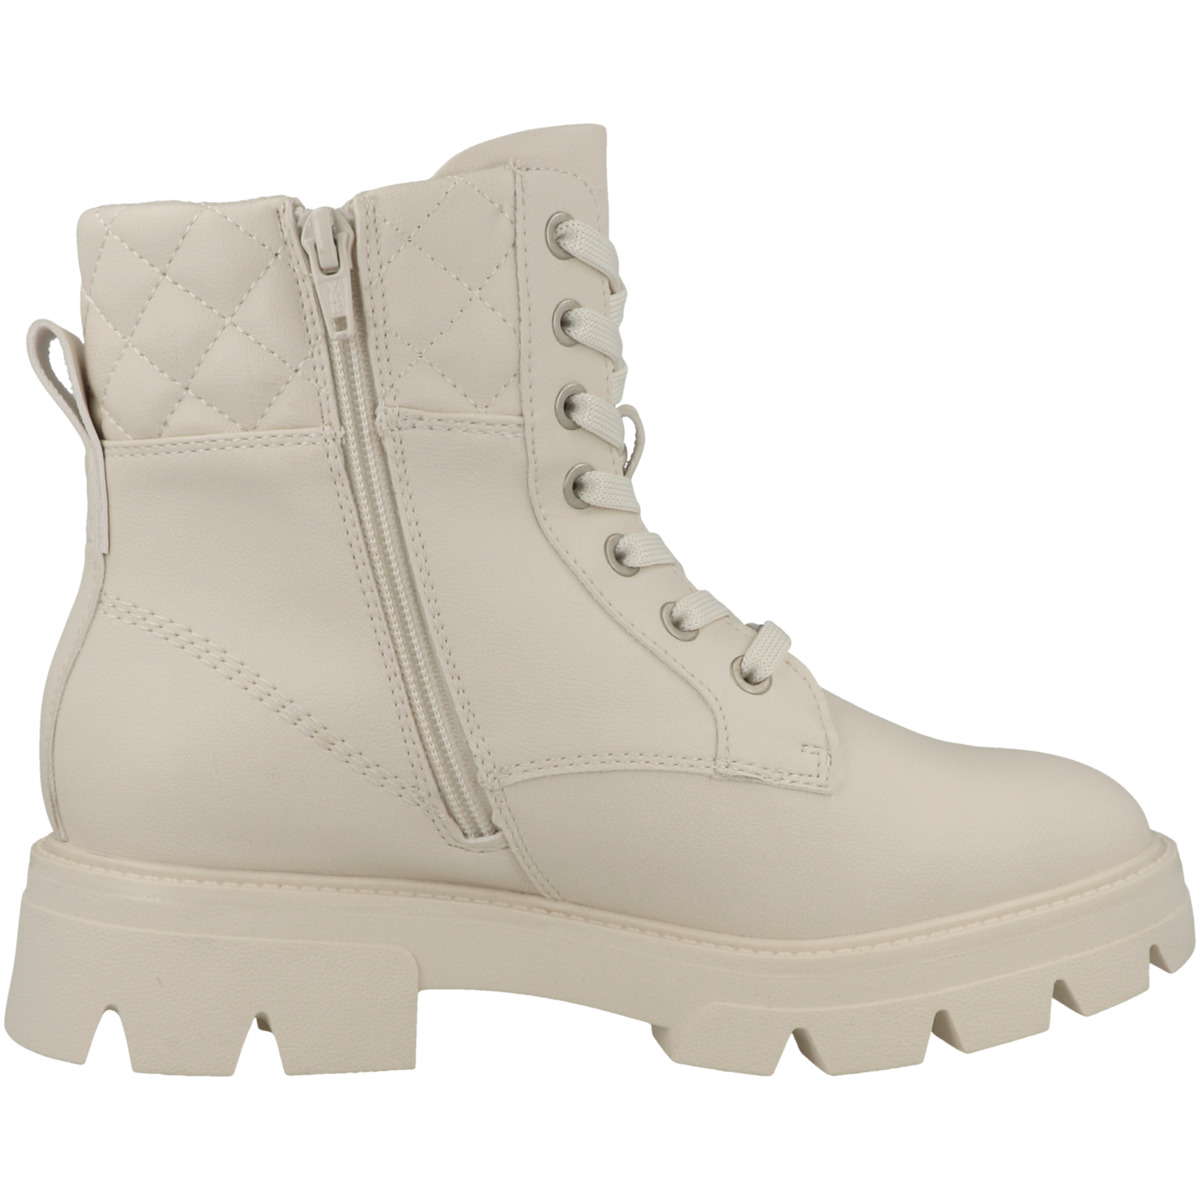 s.Oliver 5-25230-41 Boots creme